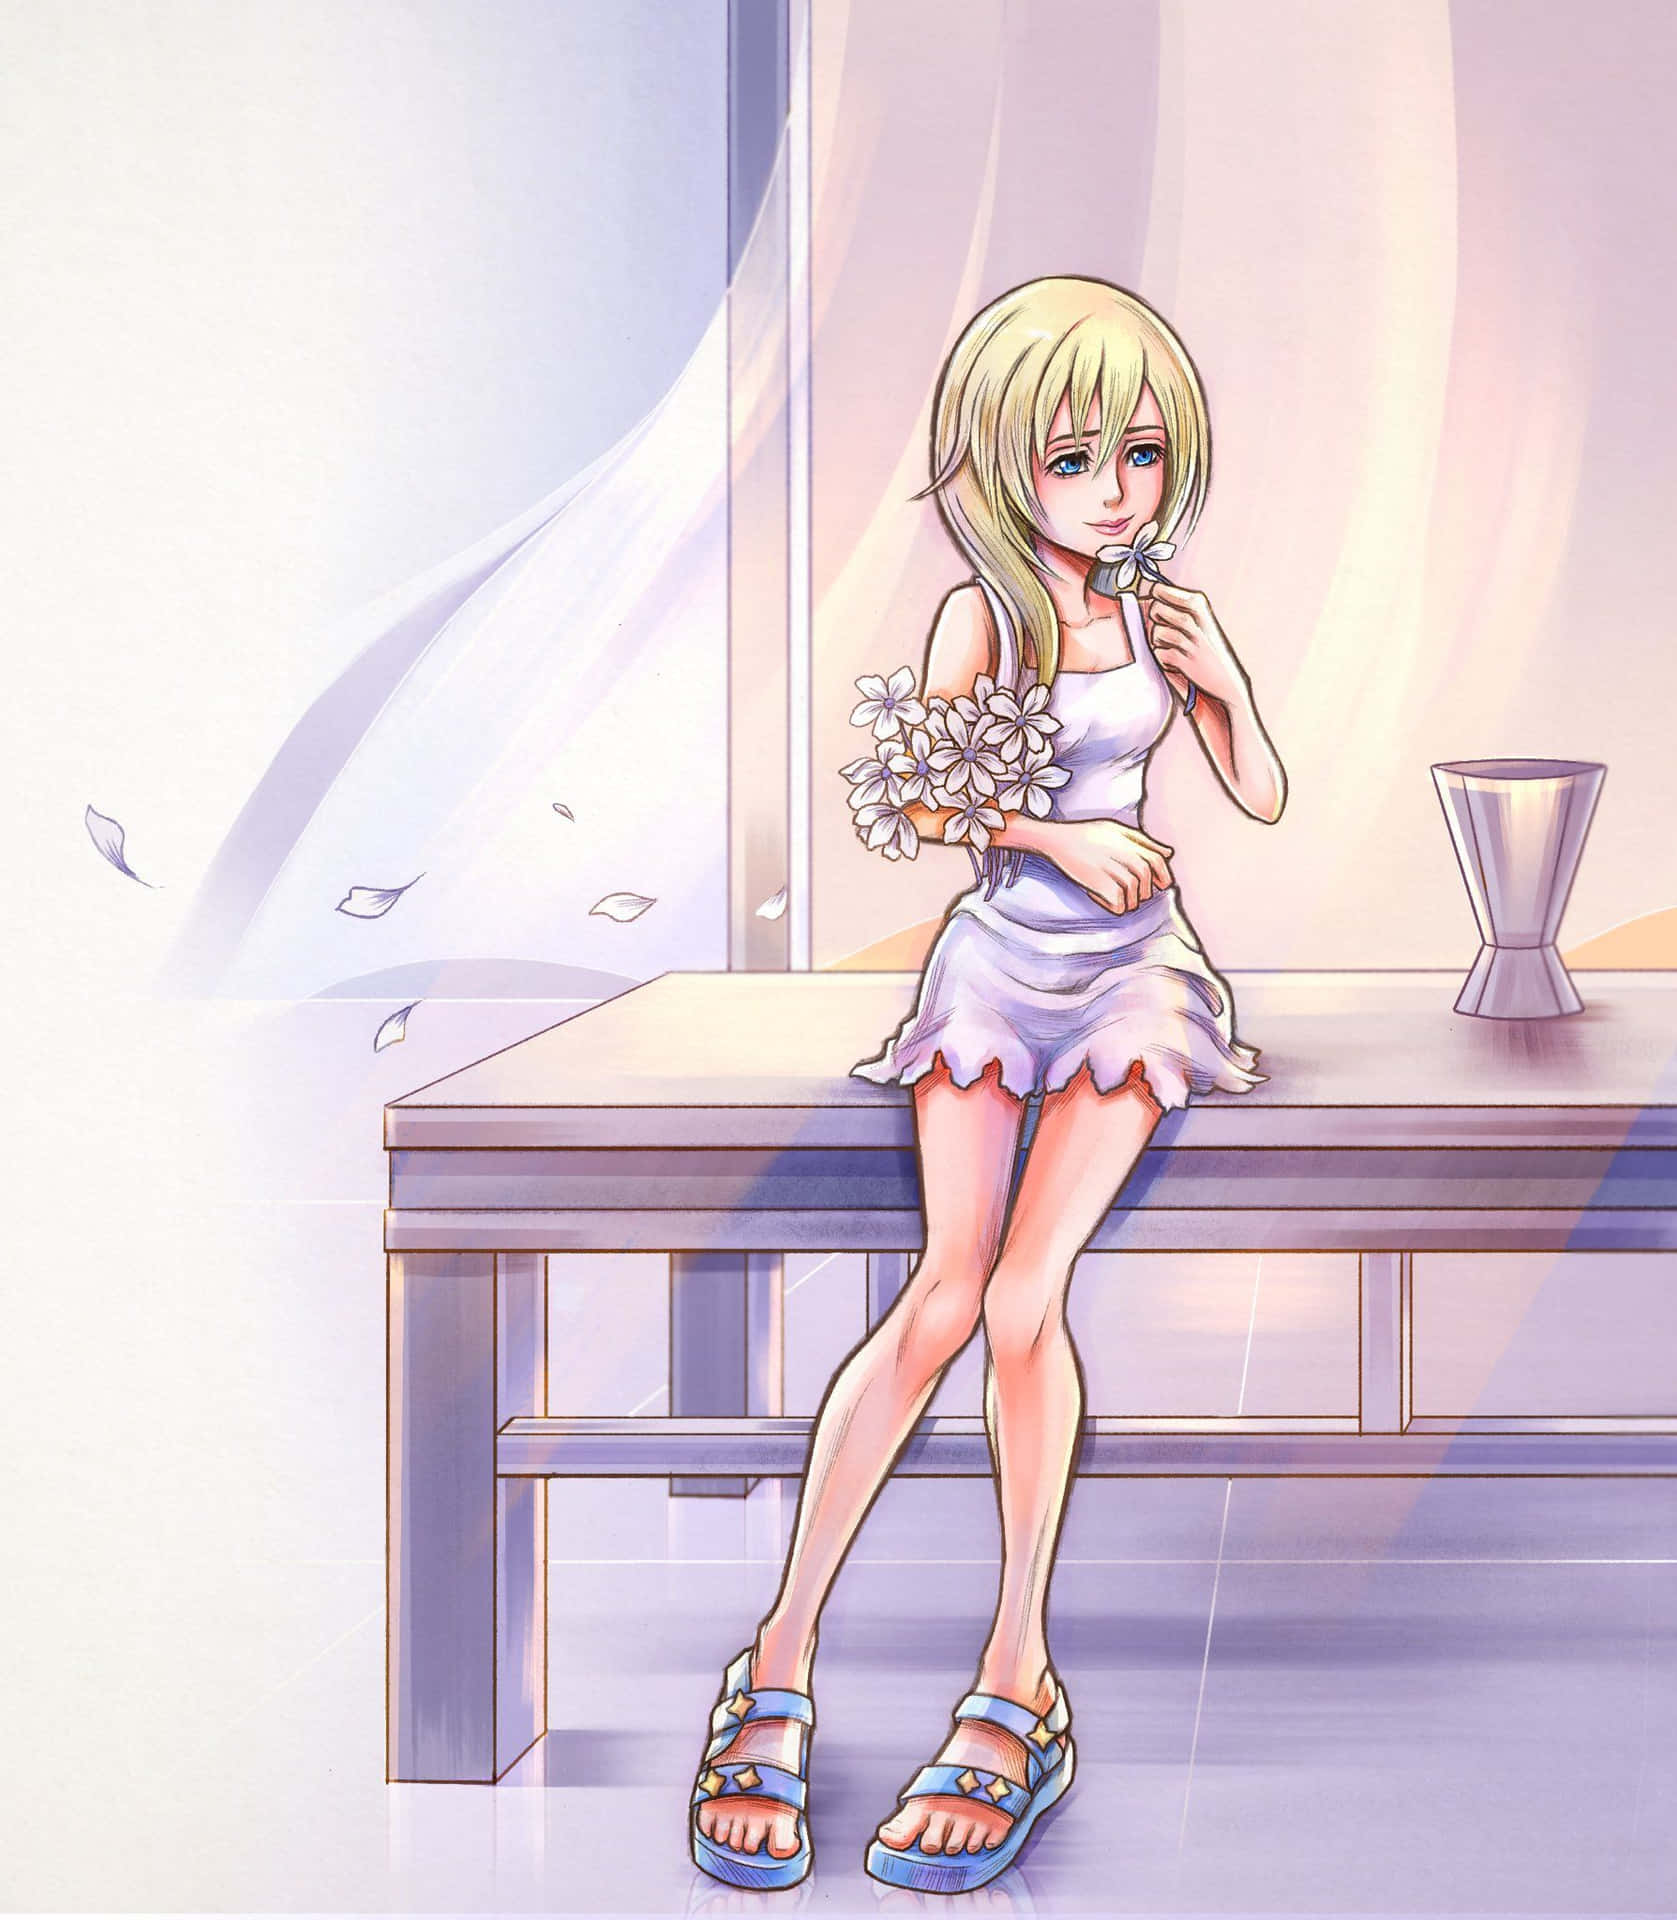 Namine contemplatively sits in the sunset surrounded by her woodland Kingdom Hearts sanctuary. Wallpaper